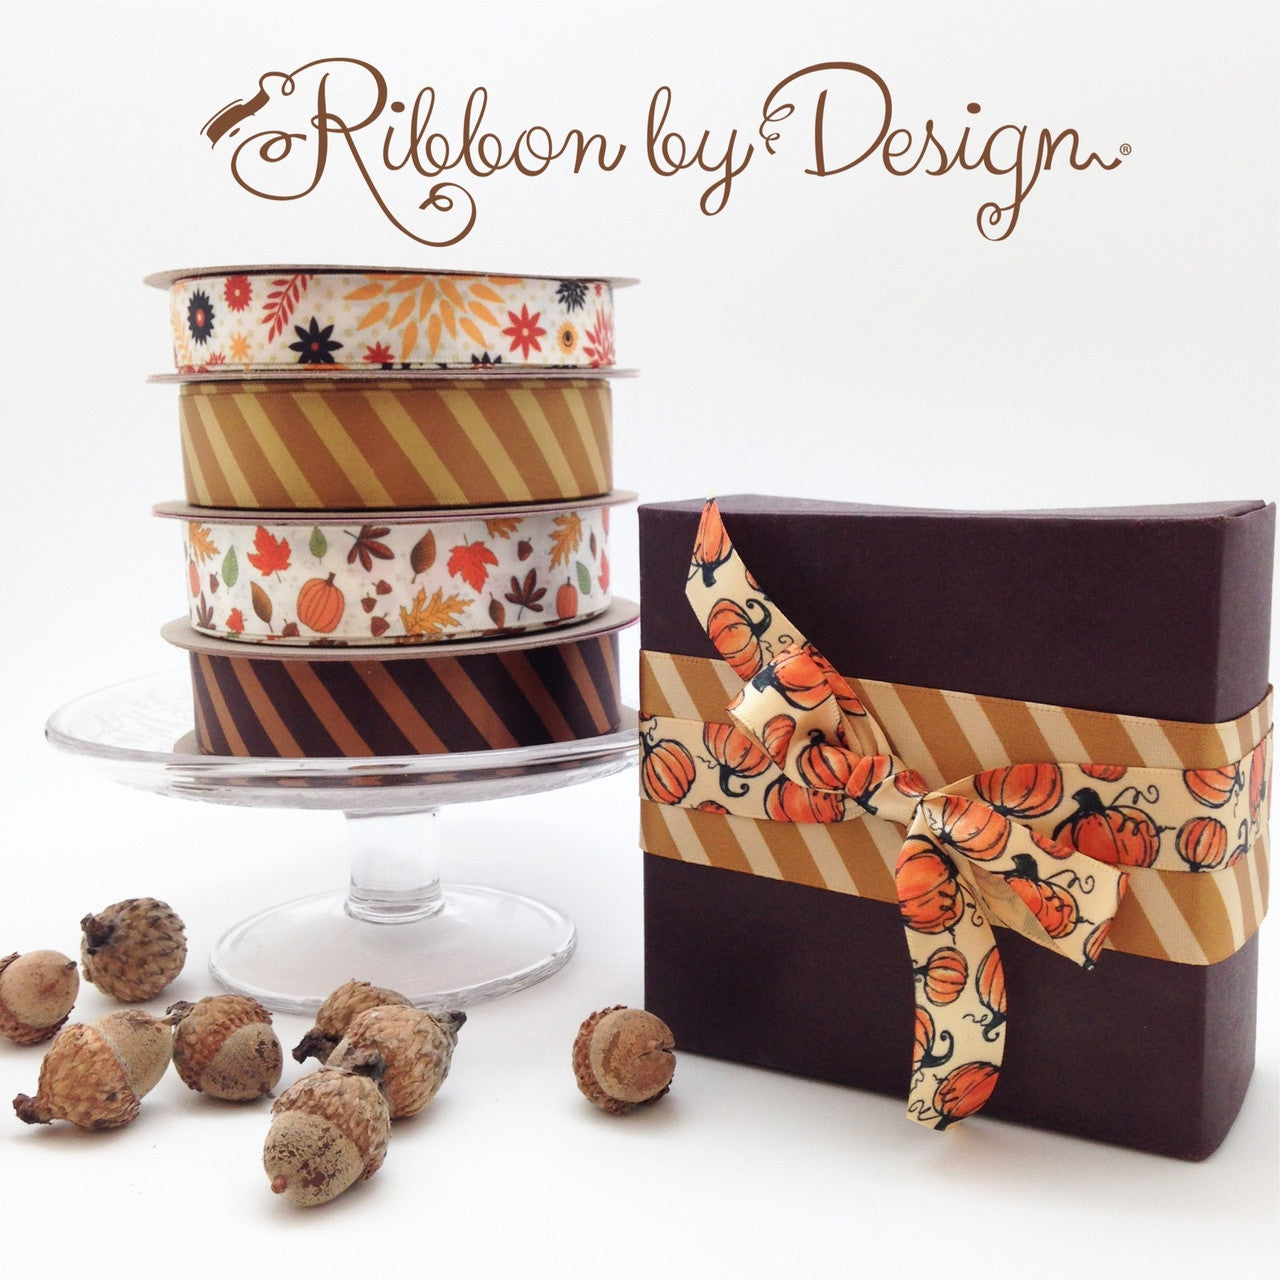 Caramel Stripes added to our collection of Fall ribbons created an extra layer of luxury to the package!